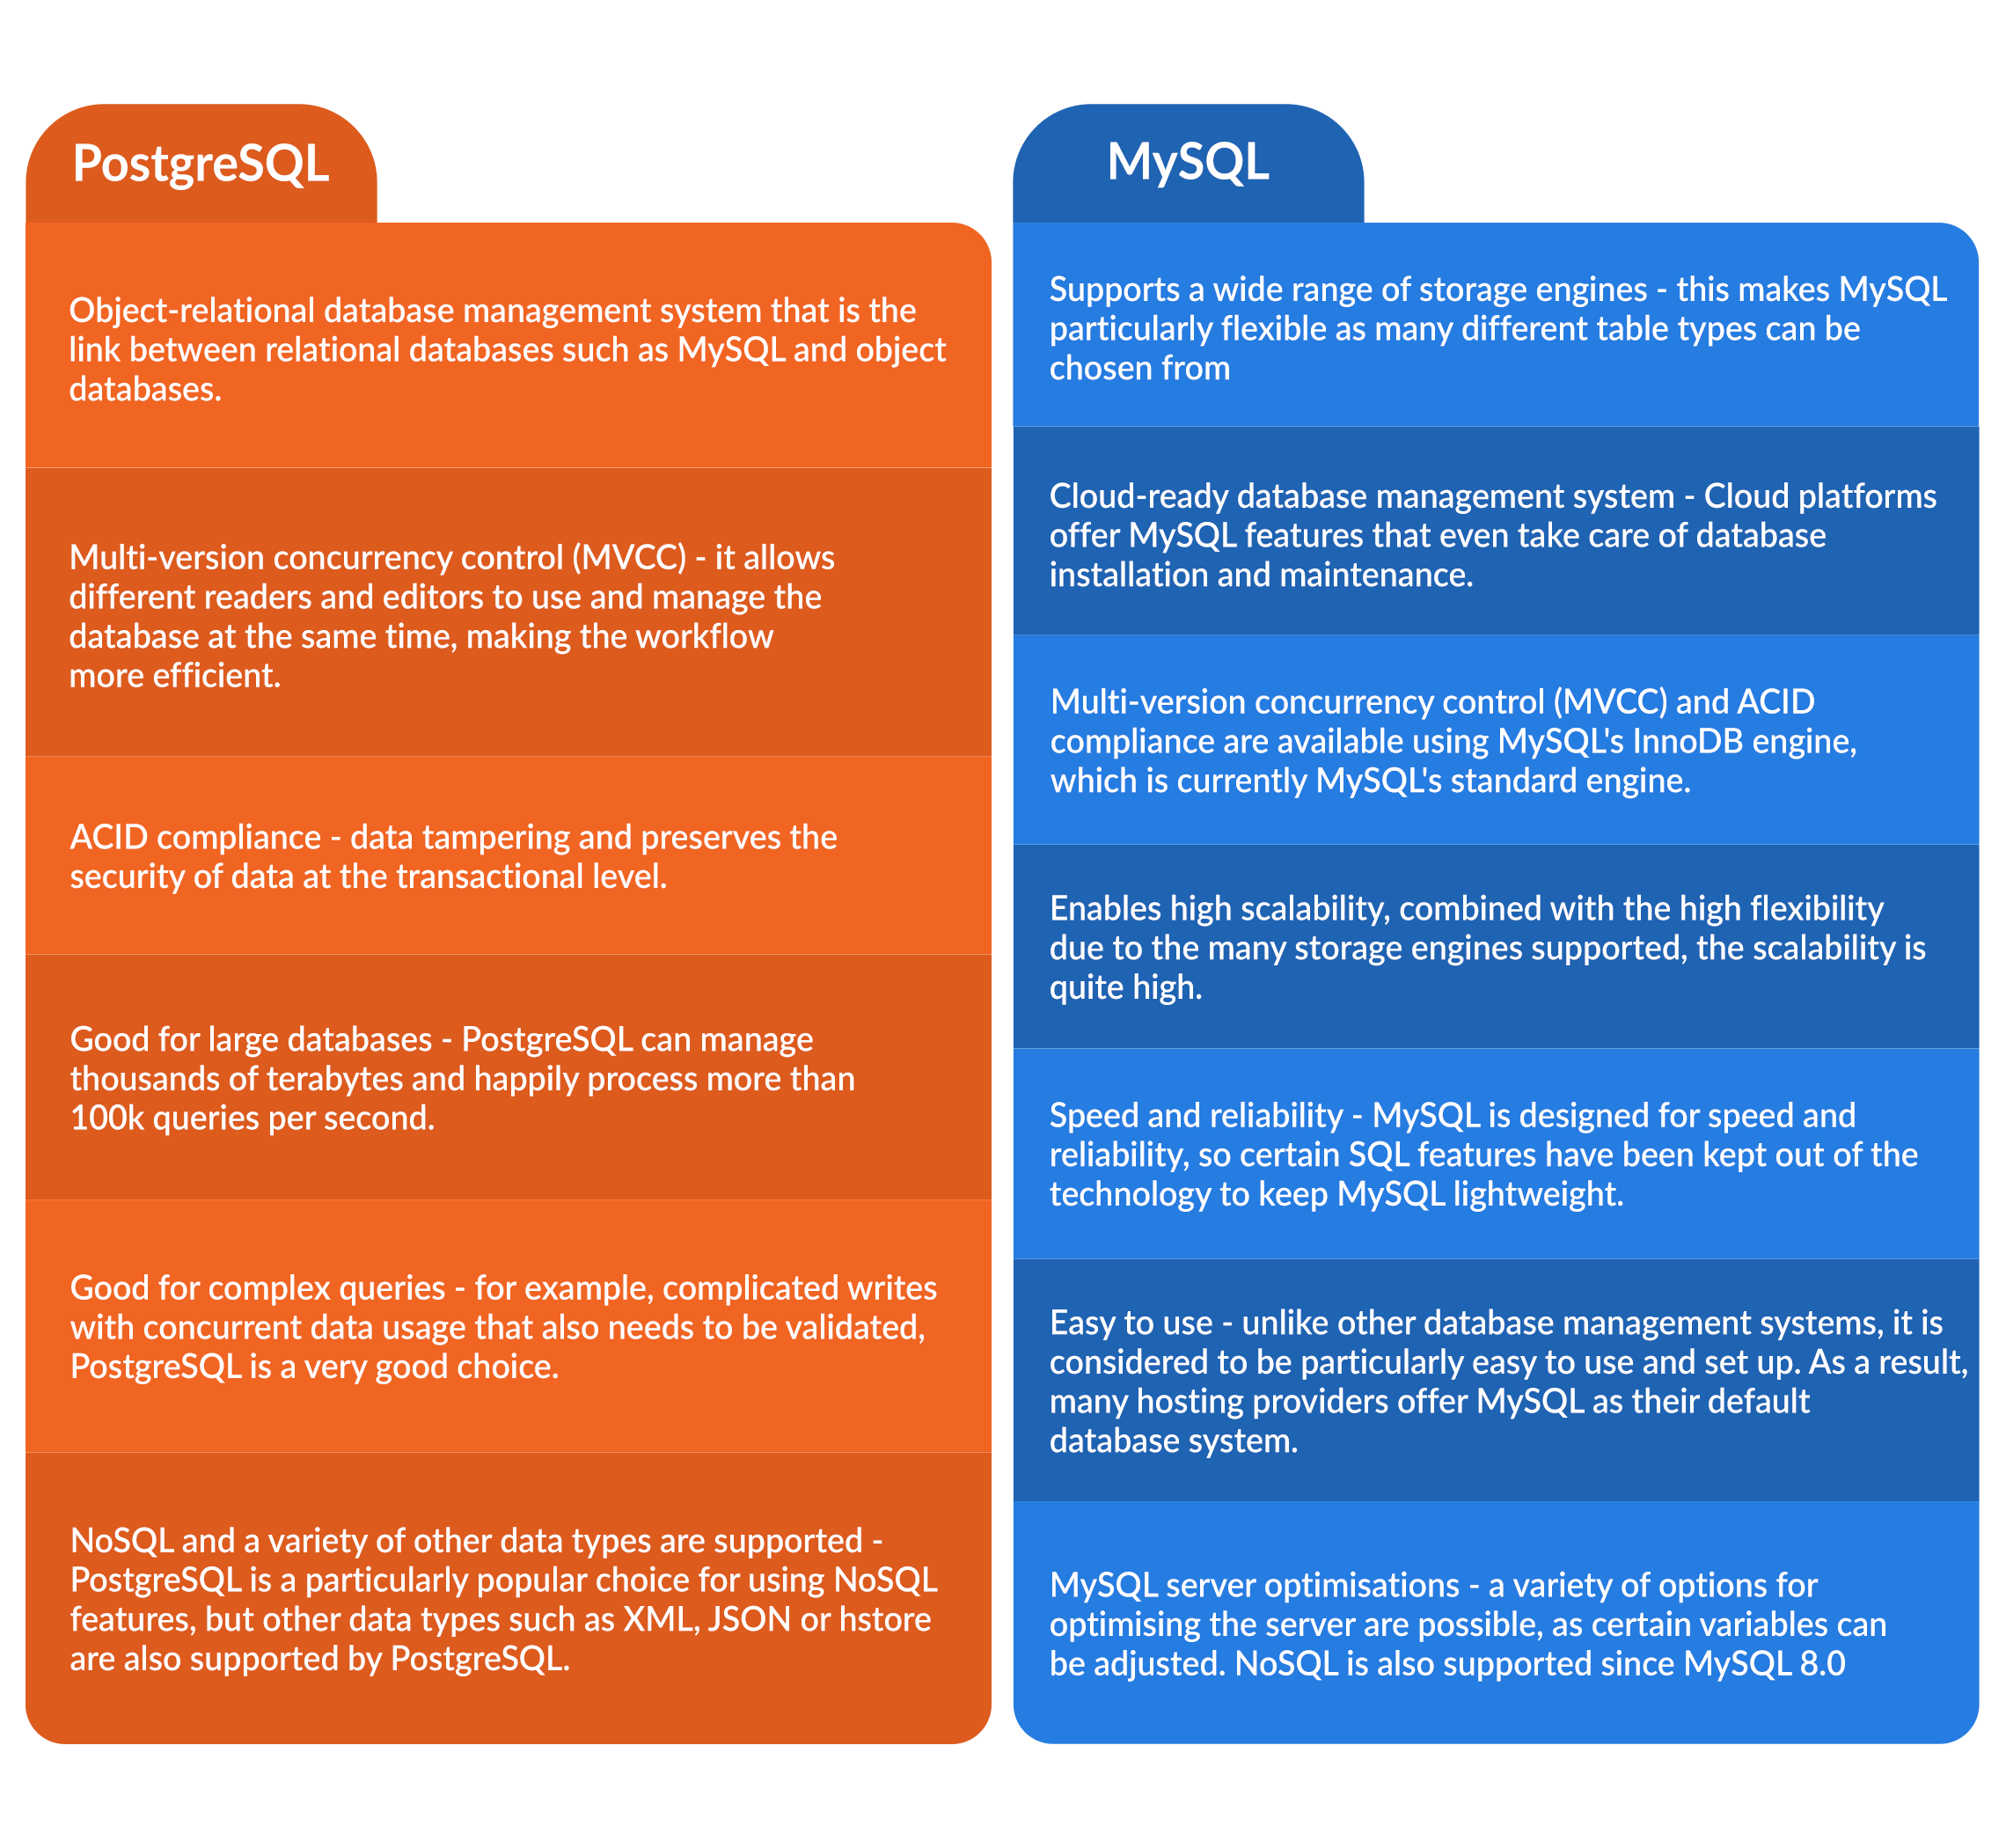 table comparing and contrasting features and functions of PostgreSQL vs MySQL